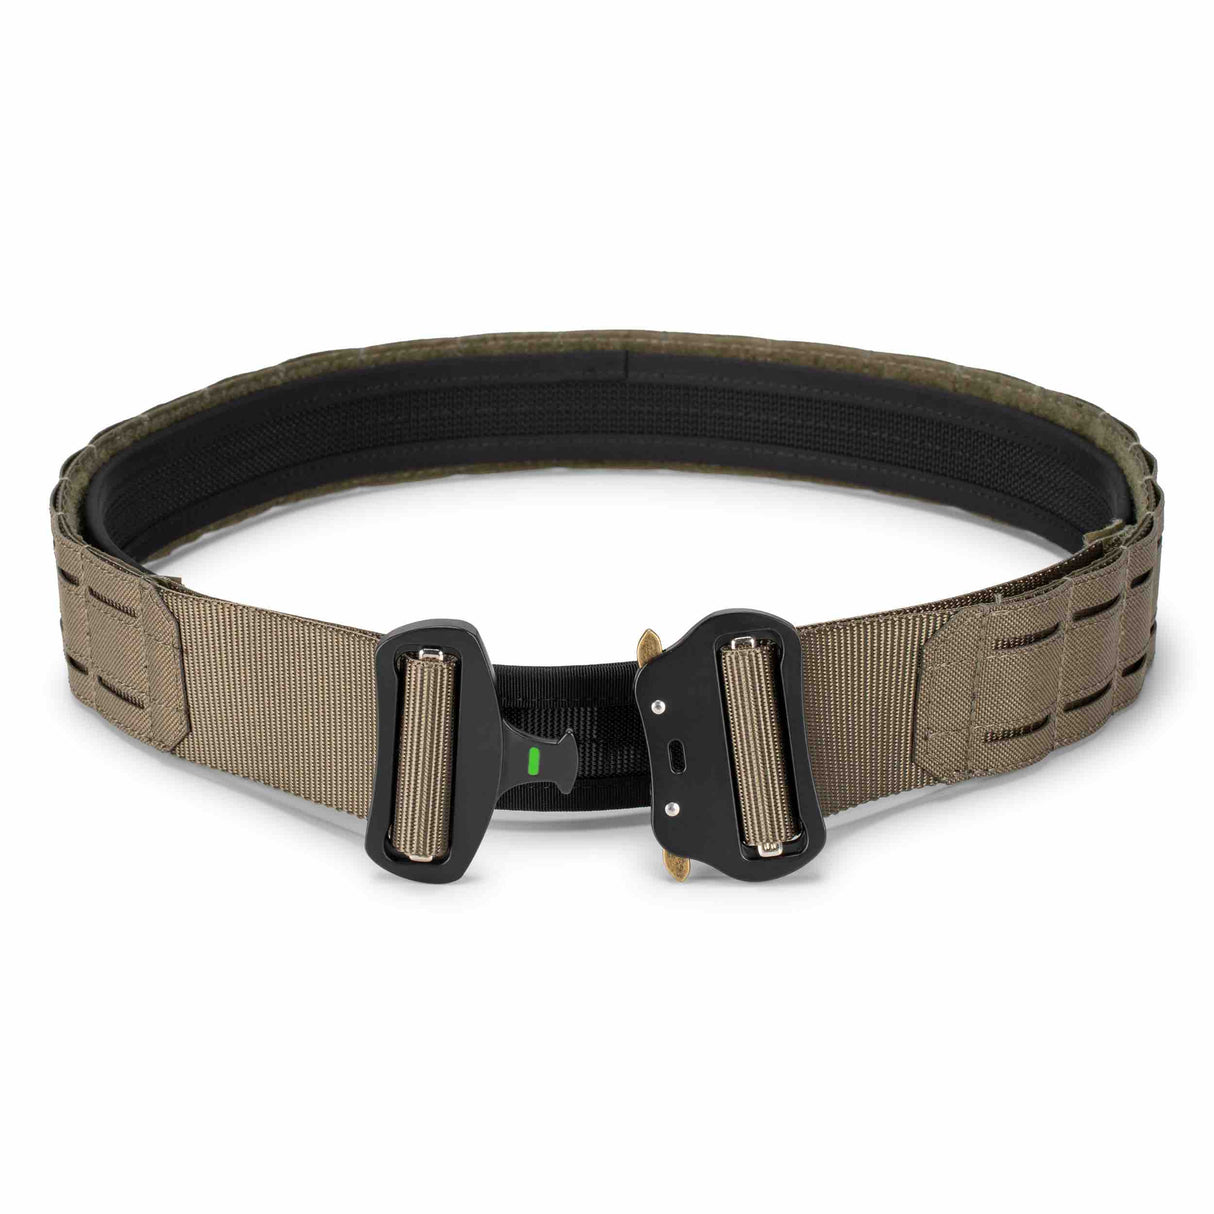 Tactical Belt in stone grey-olive